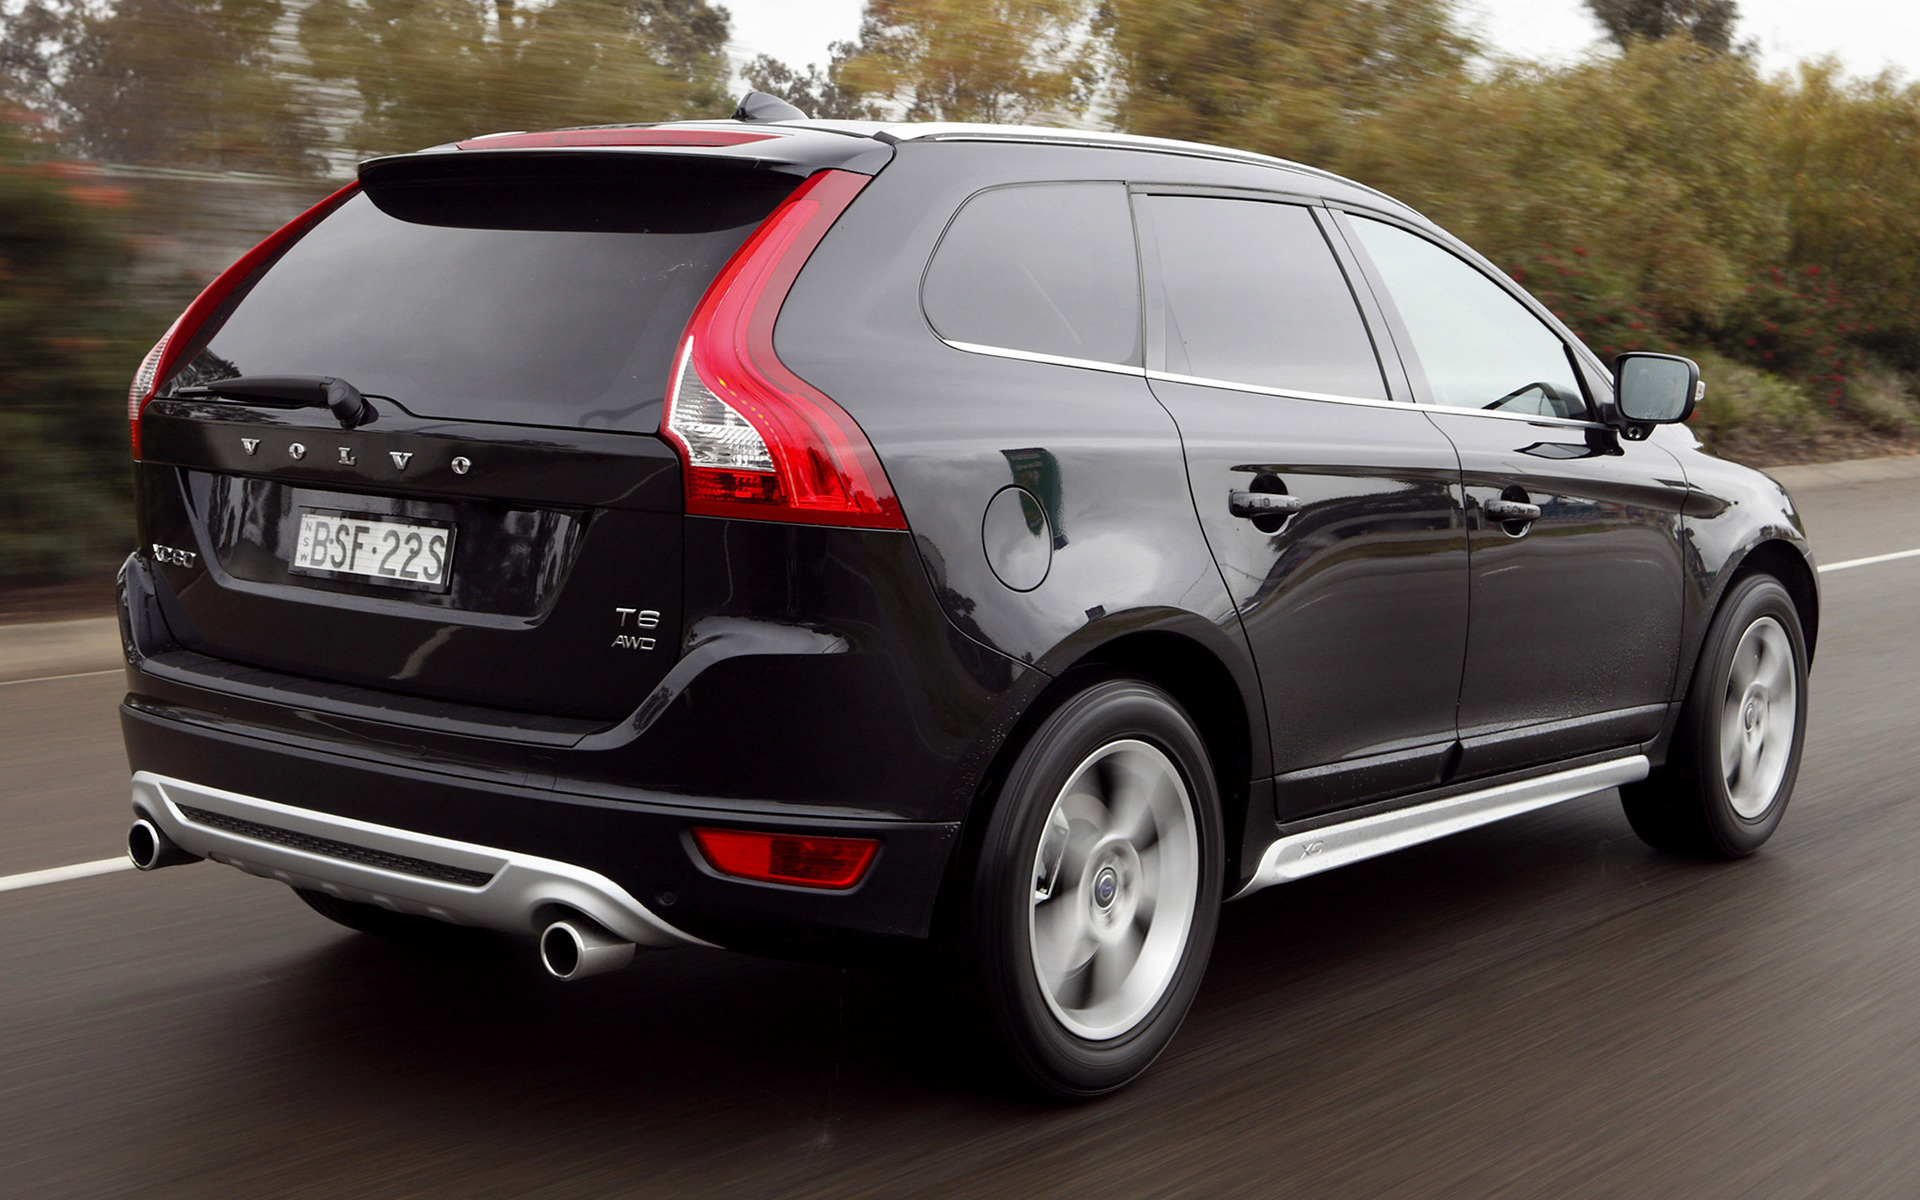 2011 Volvo XC60 R-Design (AU) - Wallpapers and HD Images | Car Pixel